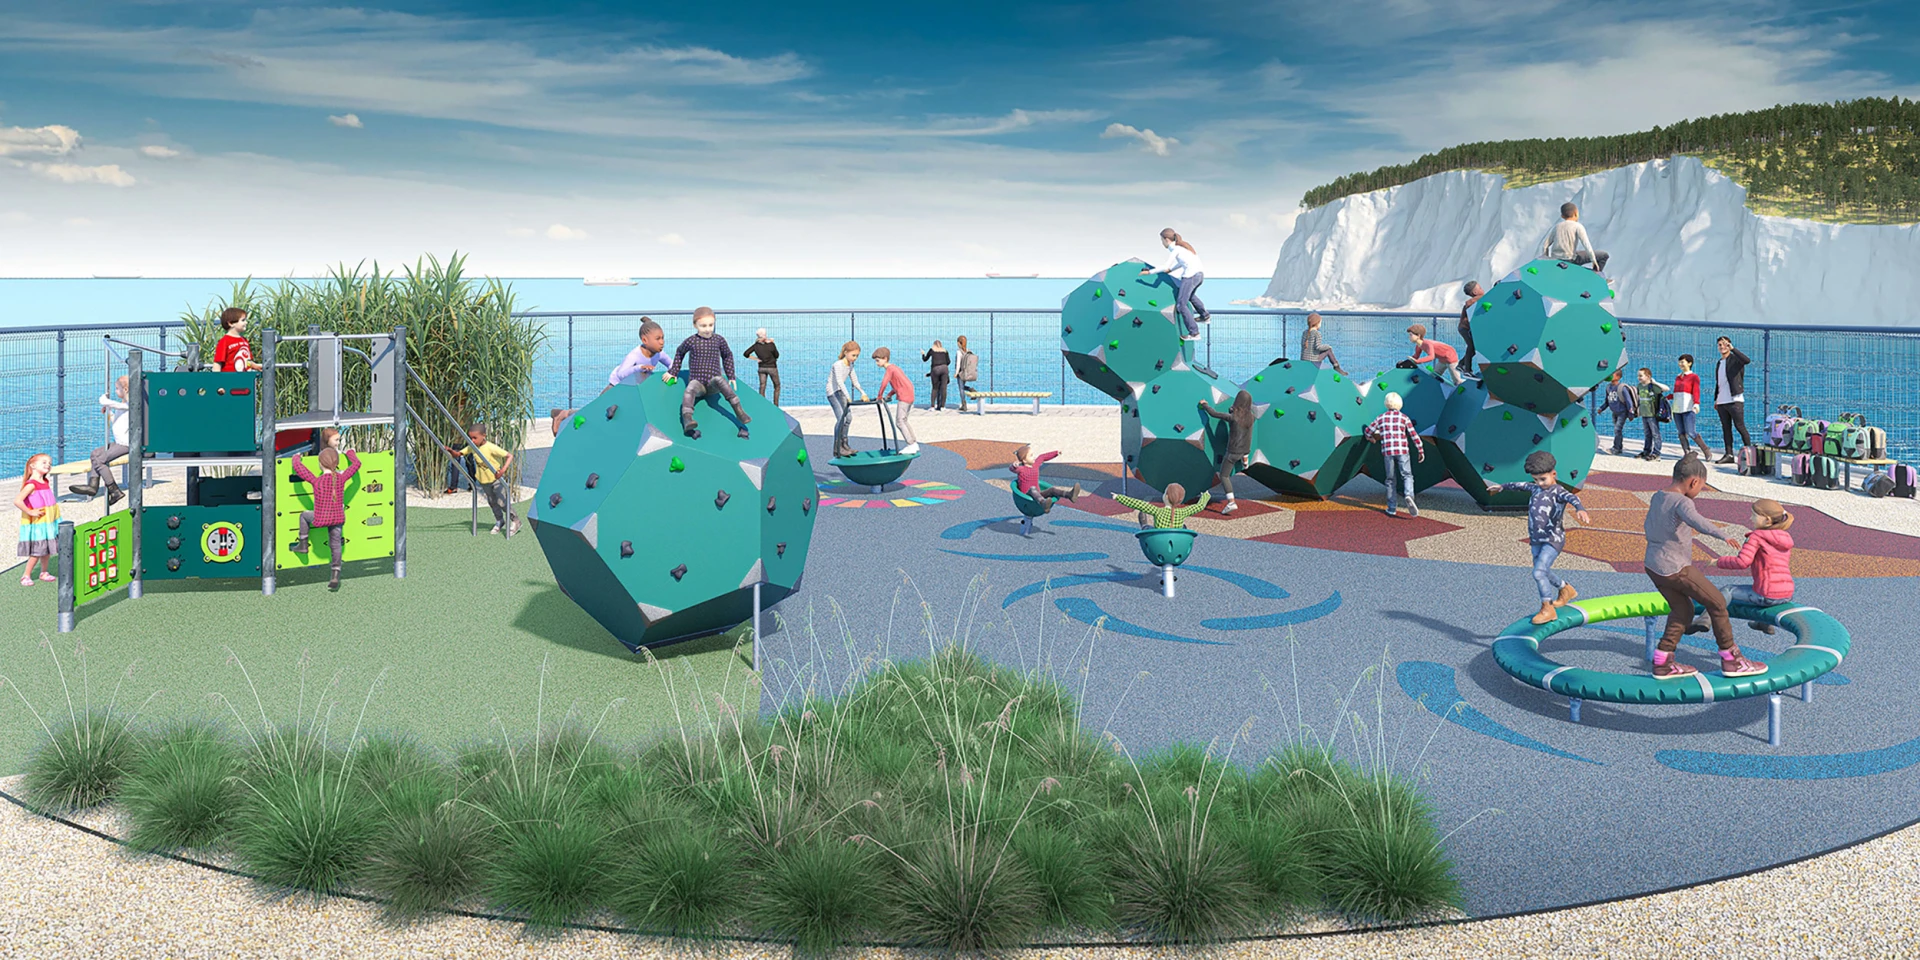 design idea for a Low Carbon Emission School-Age playground